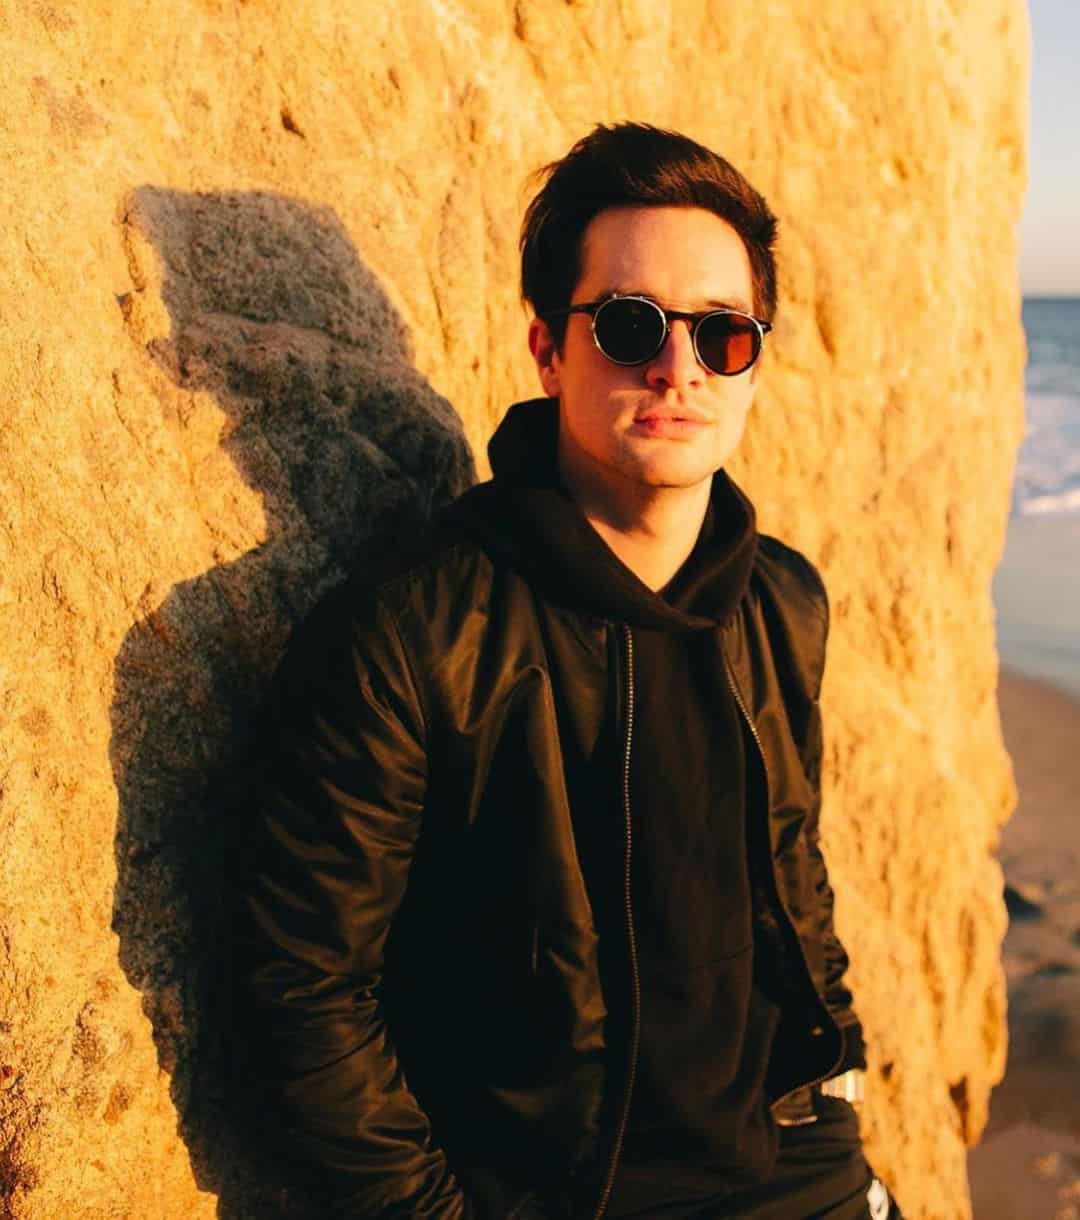 Brendon Urie - Biography, Profile, Facts, and Career